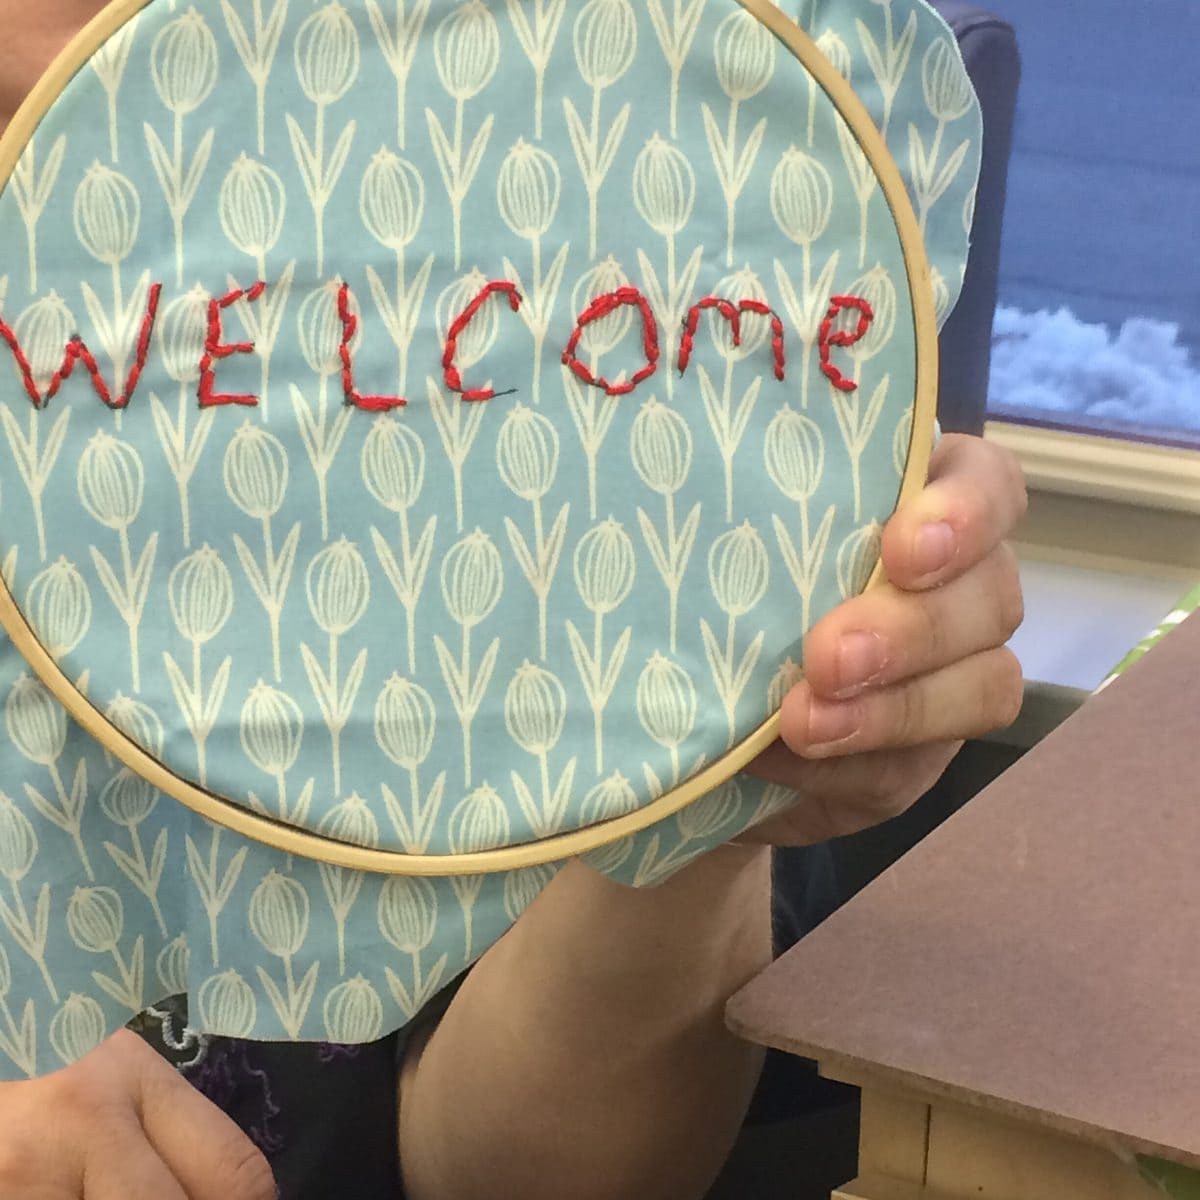 Image description: Embroidery hoop close-up, being held in one hand, with blue fabric with white flowers stretched in the hoop, with "WELCOME" embroidered in red thread.